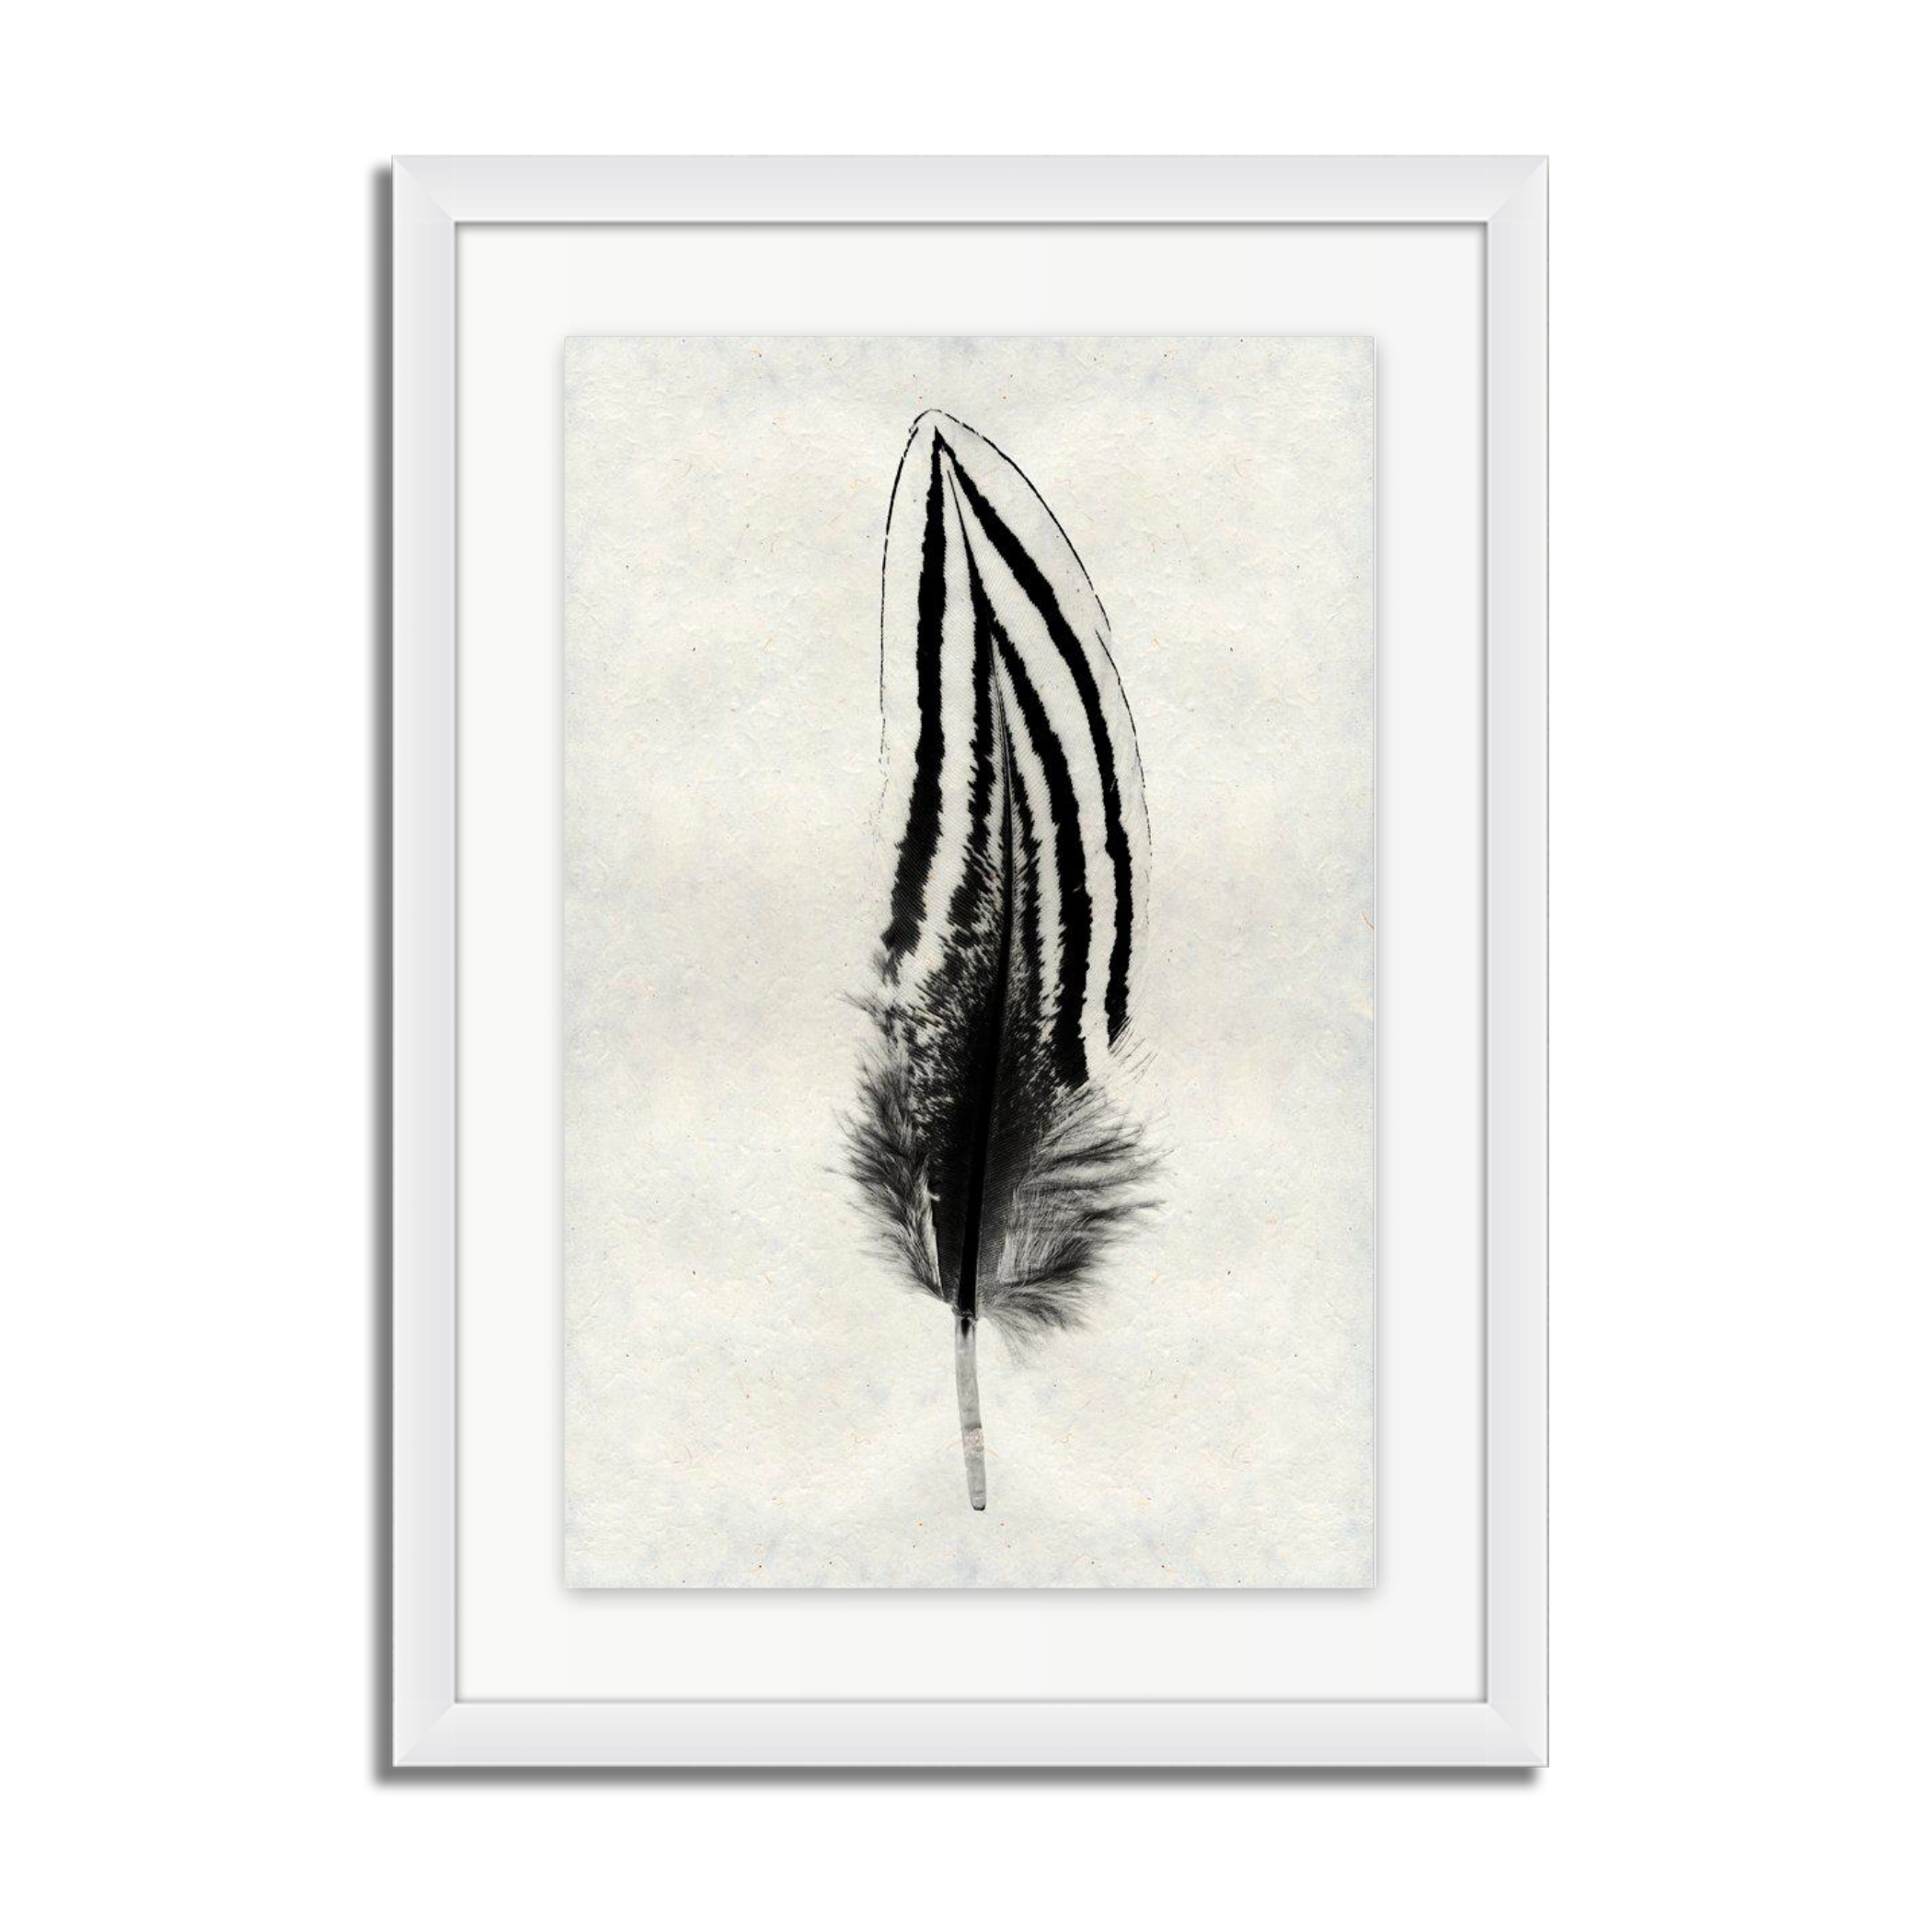 Feather Study #2 (Silver Pheasant)